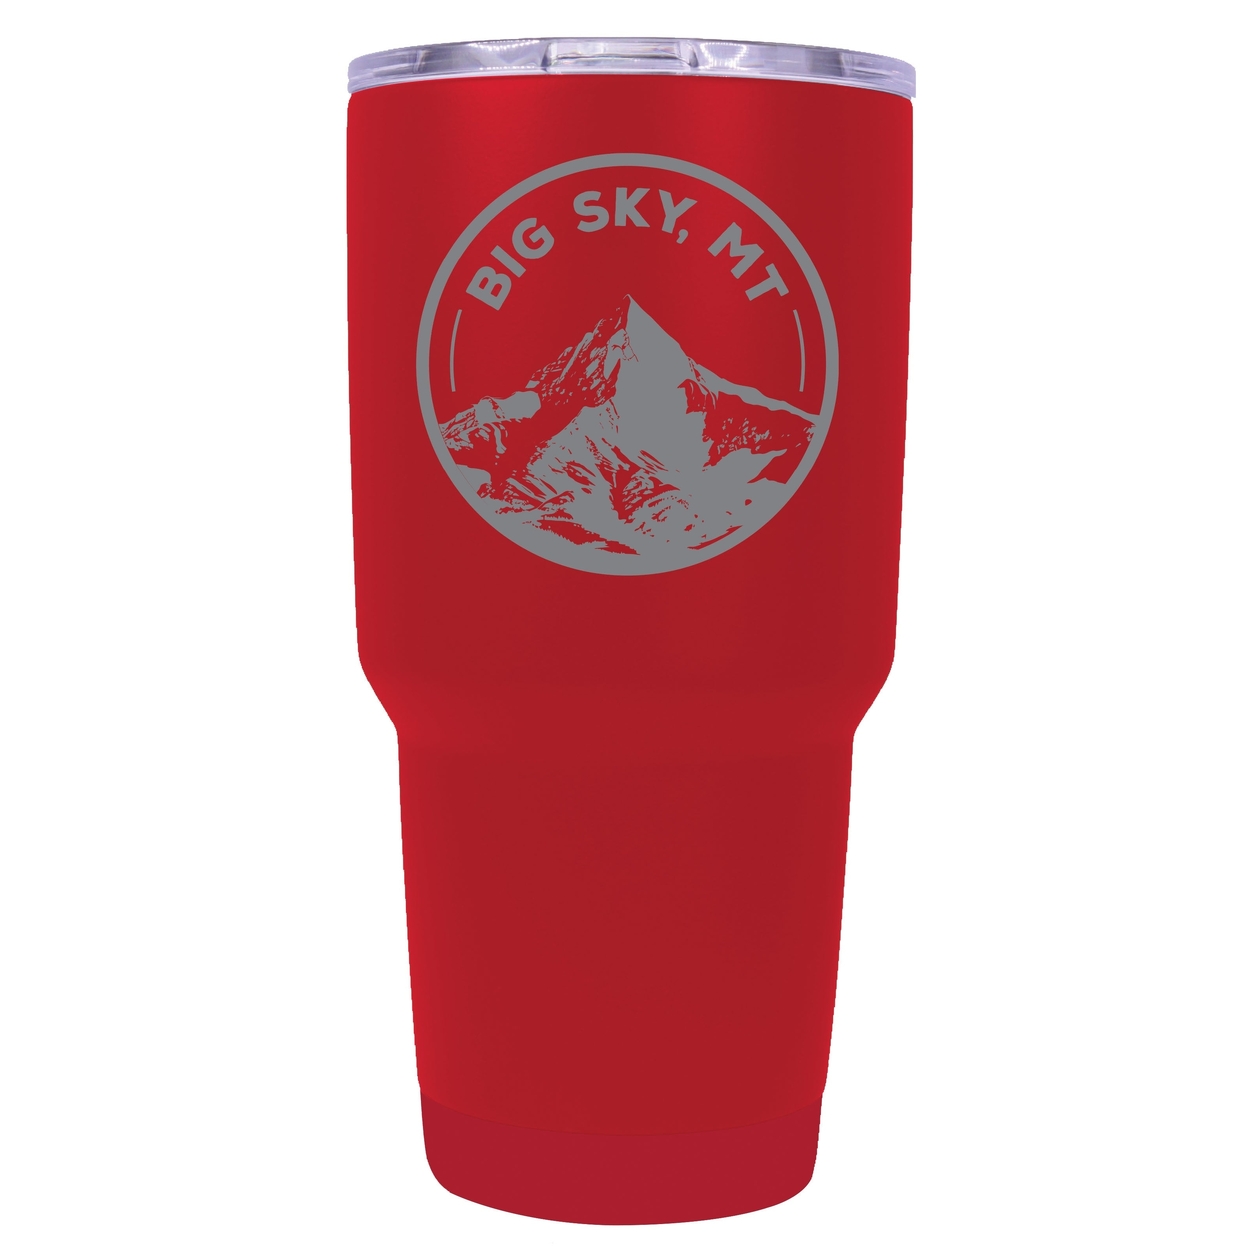 Big Sky Montana Souvenir 24 Oz Engraved Insulated Stainless Steel Tumbler - Red,,Single Unit